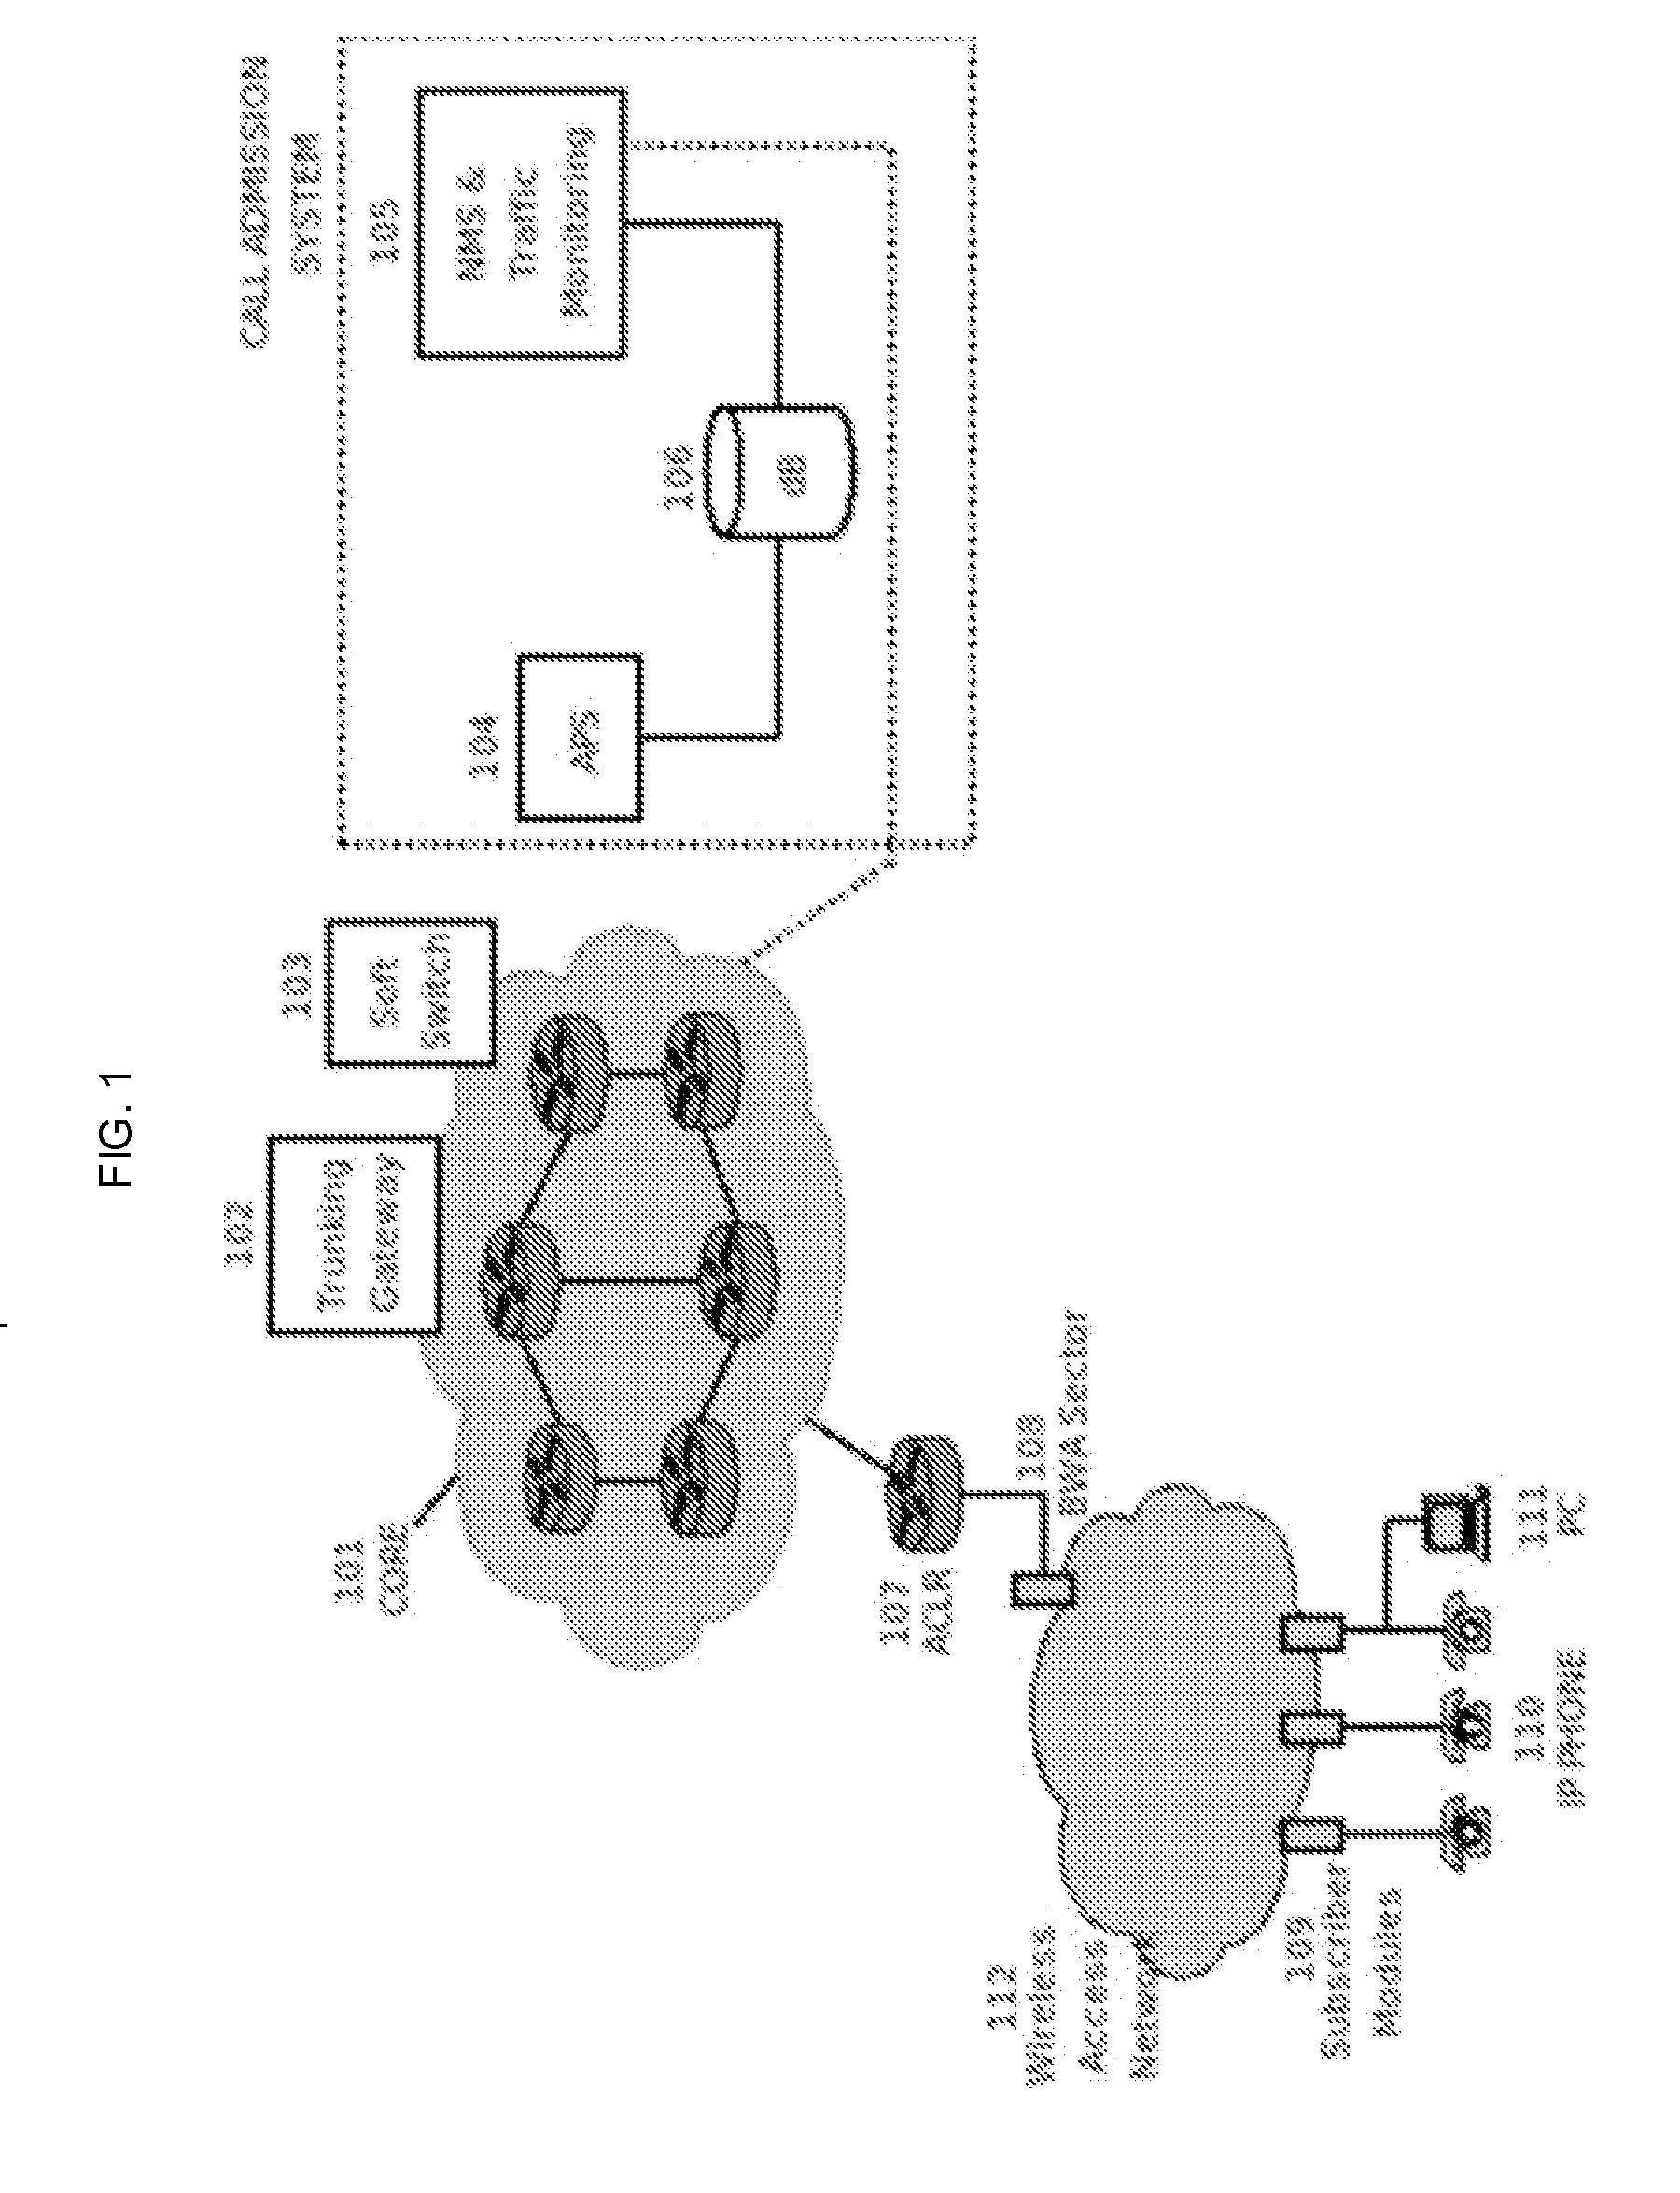 Methods and Systems for Call Admission Control and Providing Quality of Service in Broadband Wireless Access Packet-Based Networks